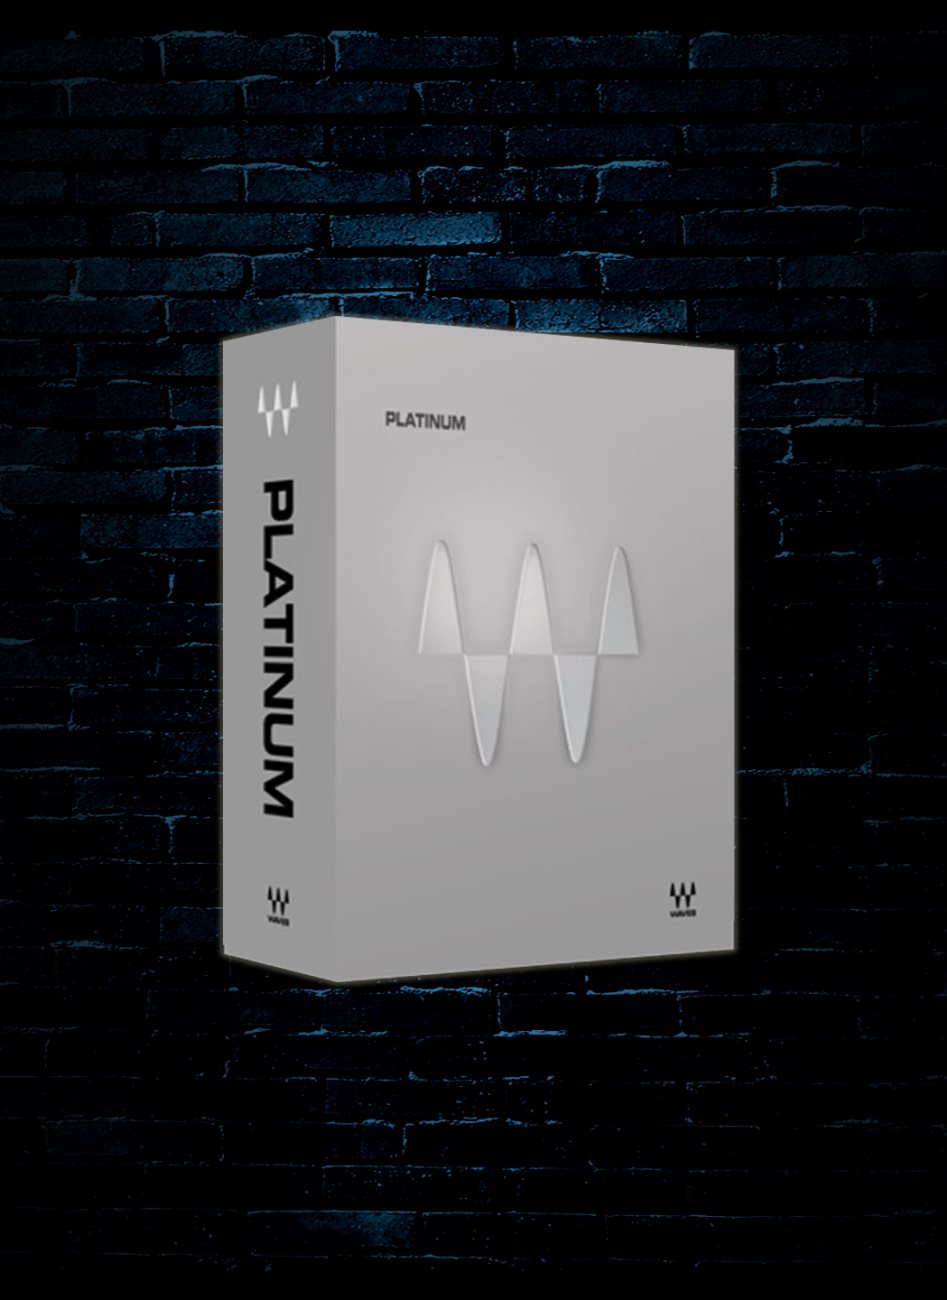 Free waves plugins for pc